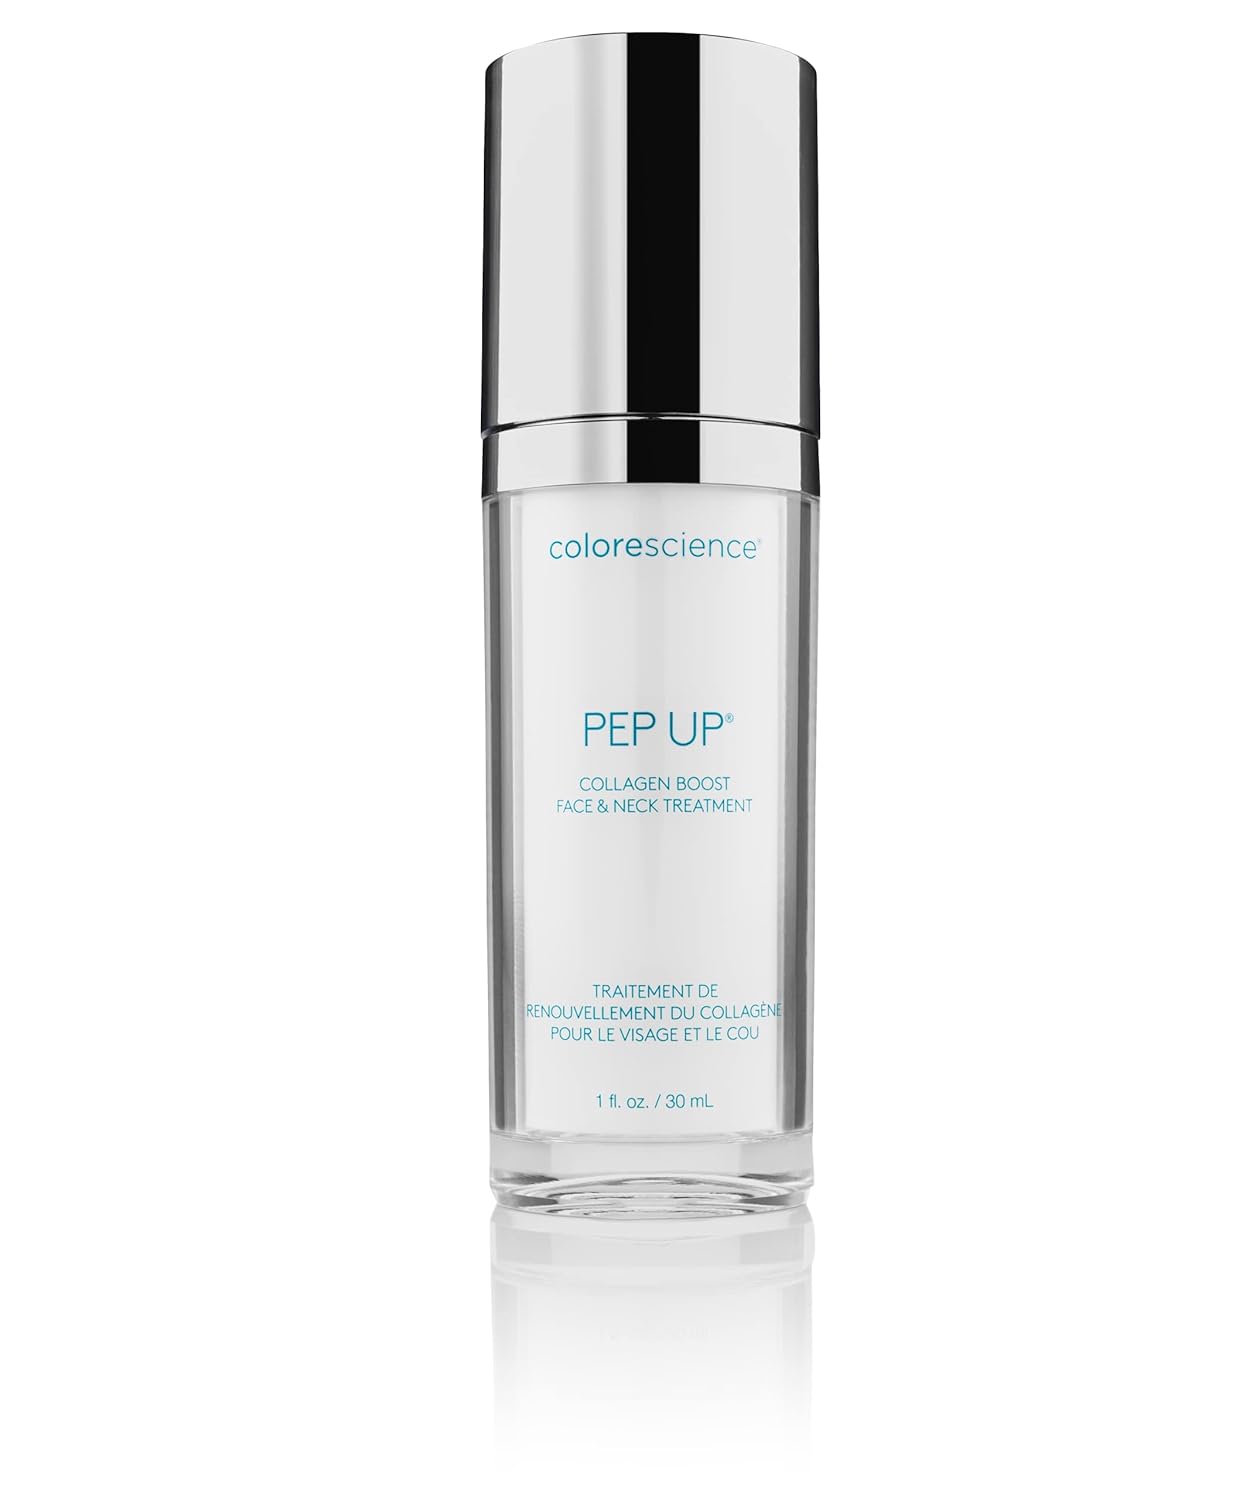 Colorescience Pep Up Collagen Renewal Face & Neck Treatment, Promotes Collagen and Elastin Production, 10 Peptides to Defend Against Signs of Aging